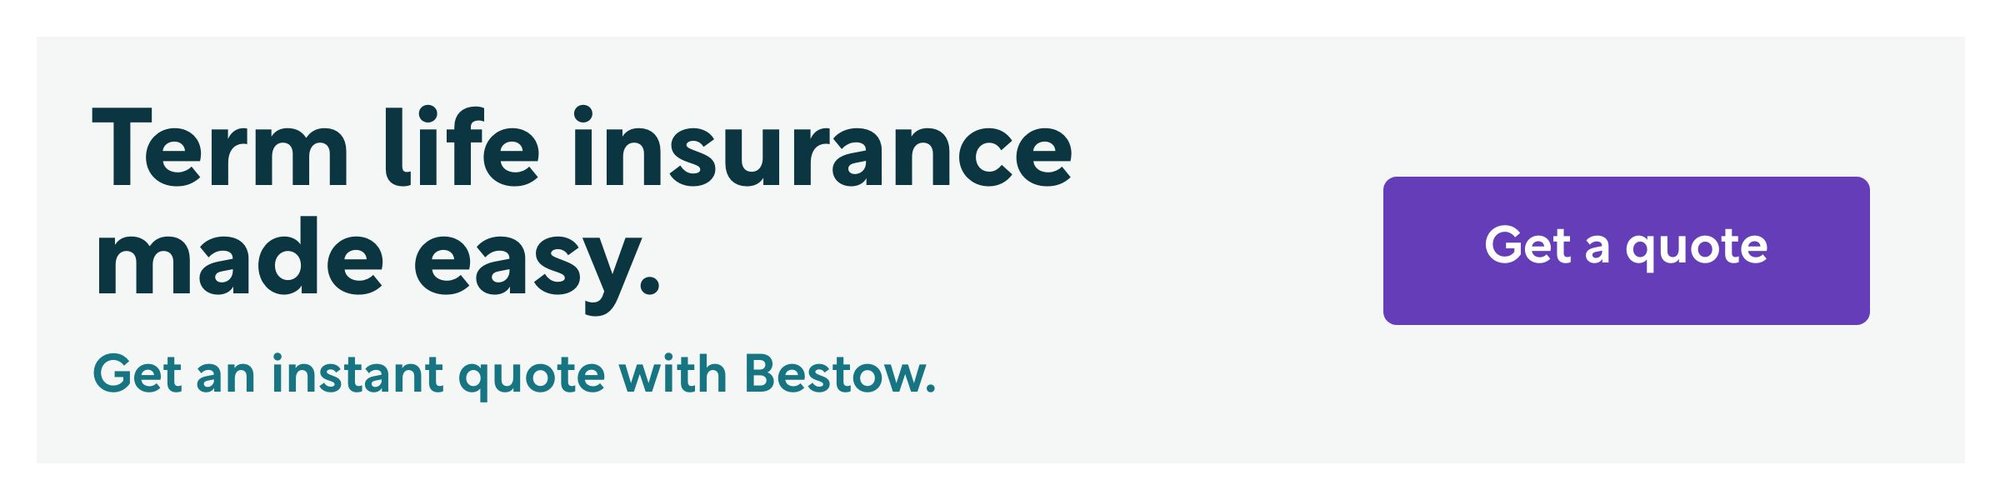 Term life insurance made easy. Get an instant quote with Bestow. Get a quote.